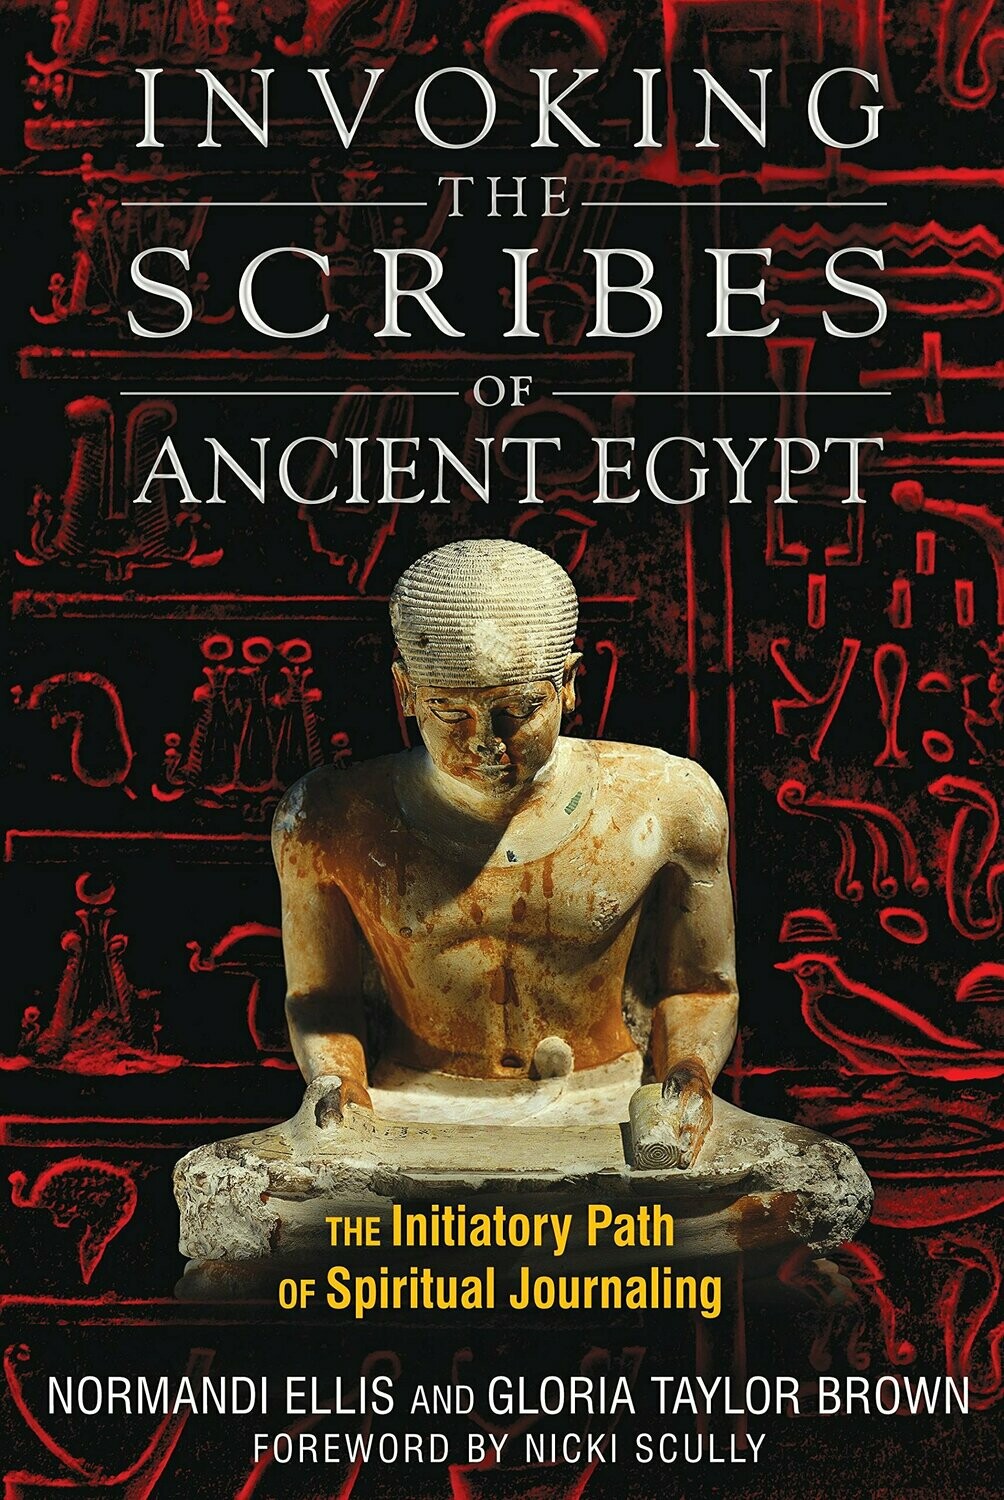 Invoking the Scribes of Ancient Egypt by Normandi Ellis